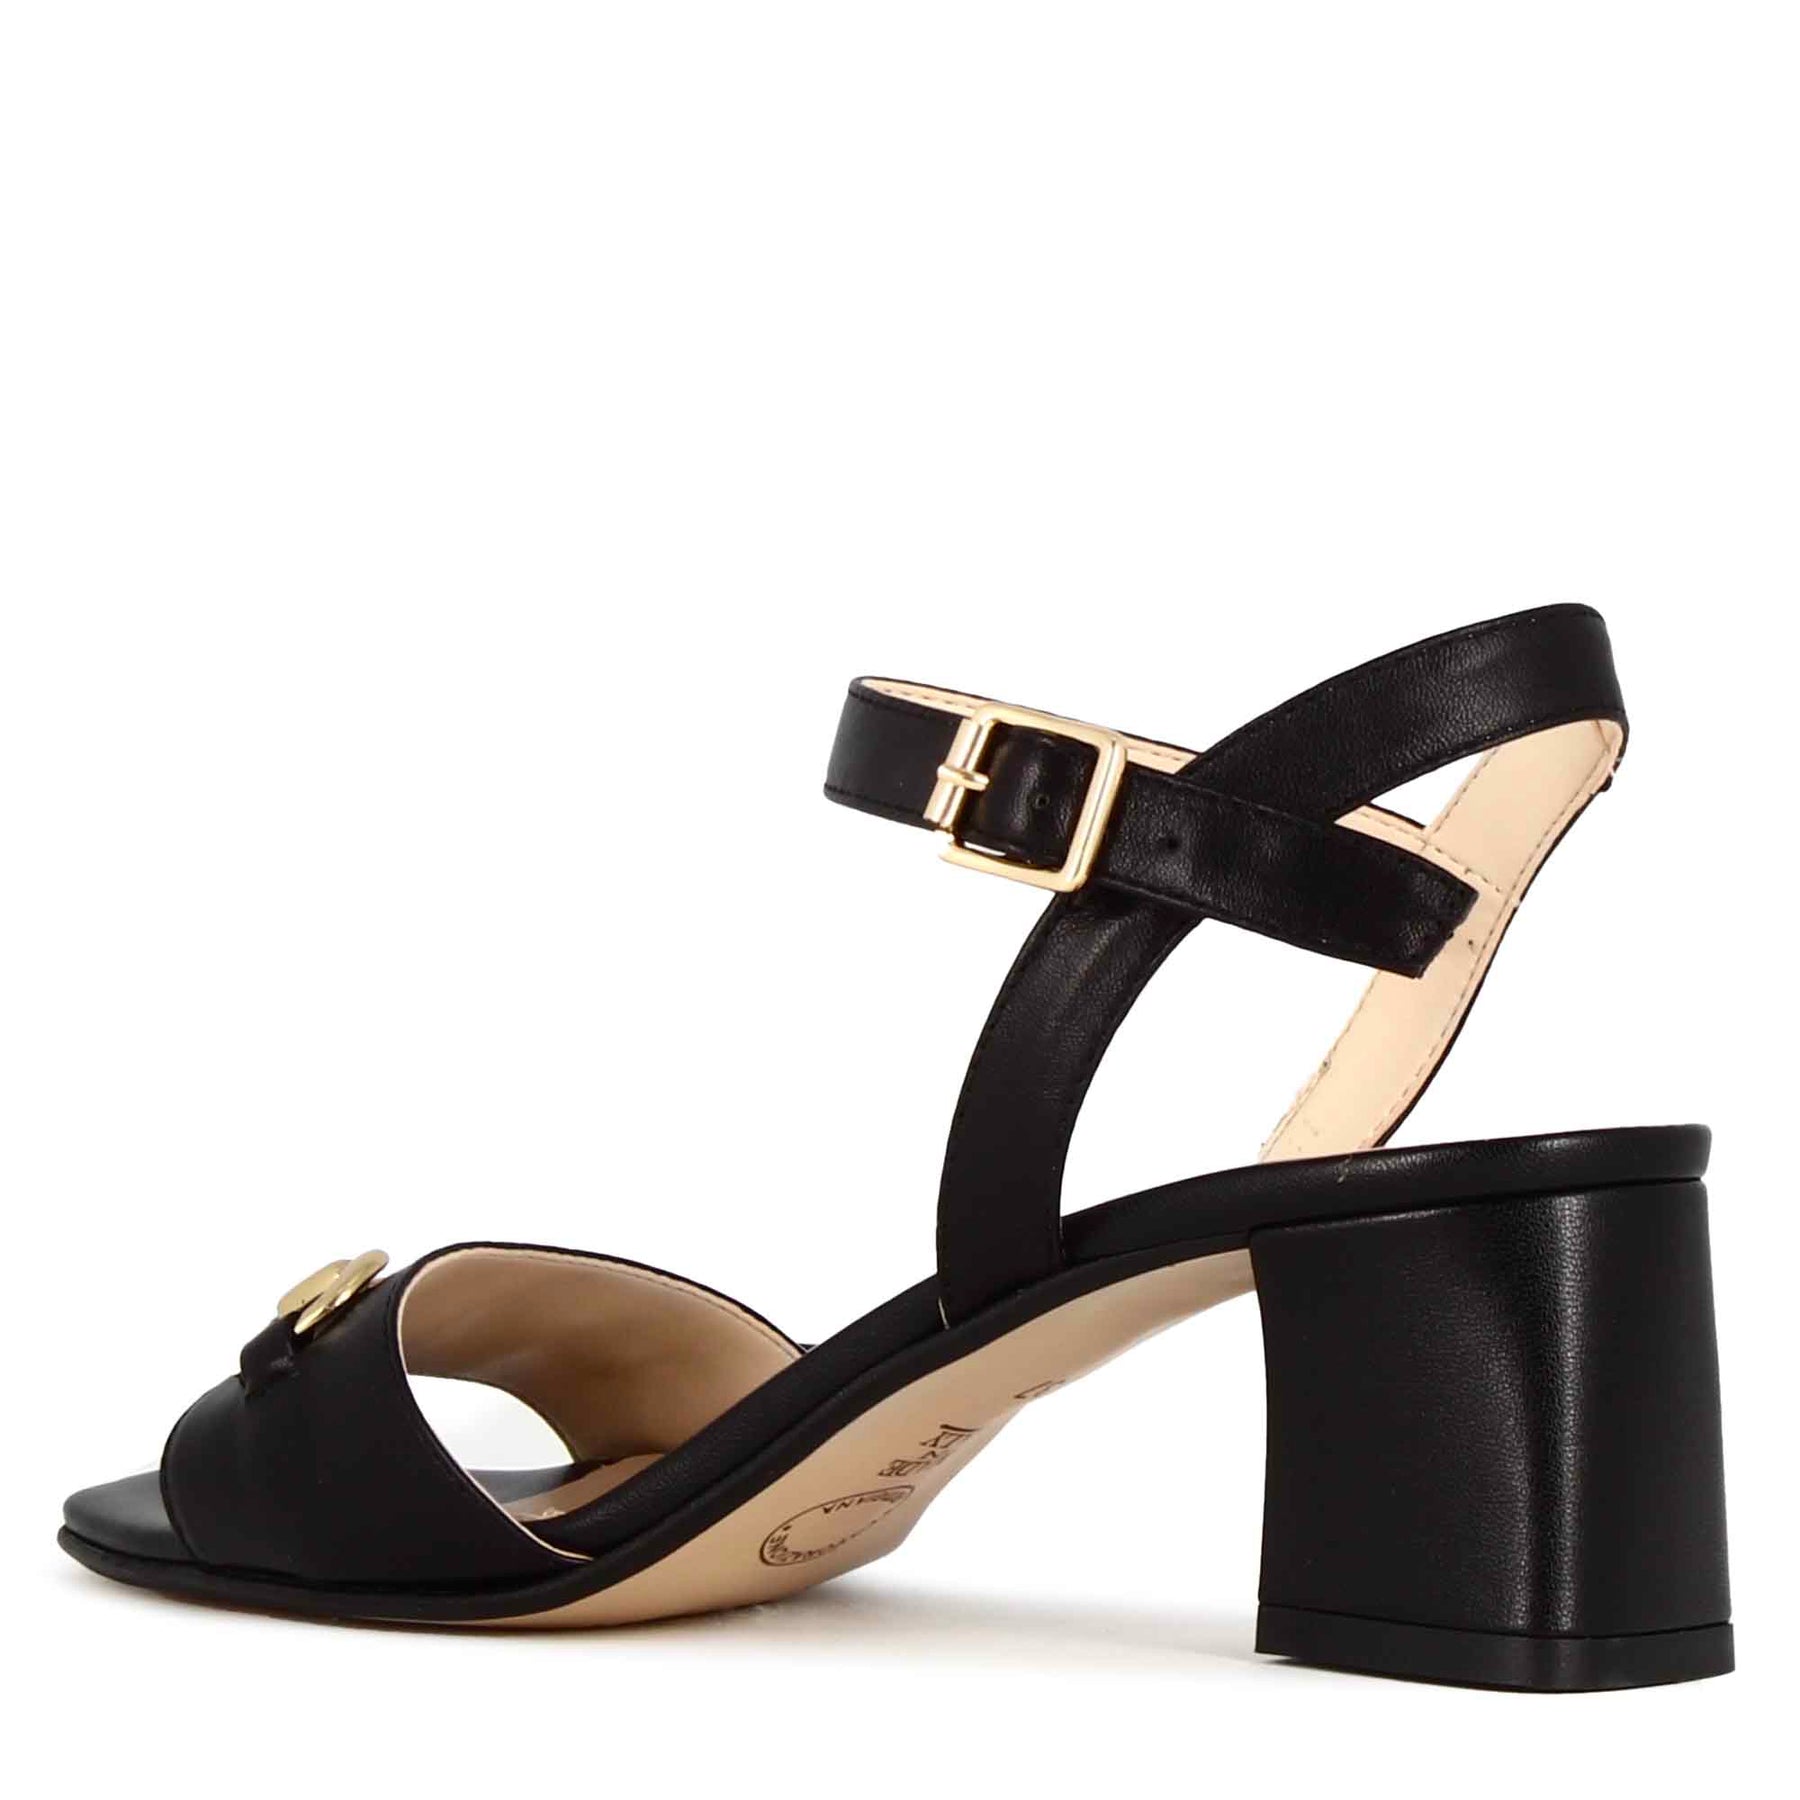 Women's sandal in black leather with handmade clamp